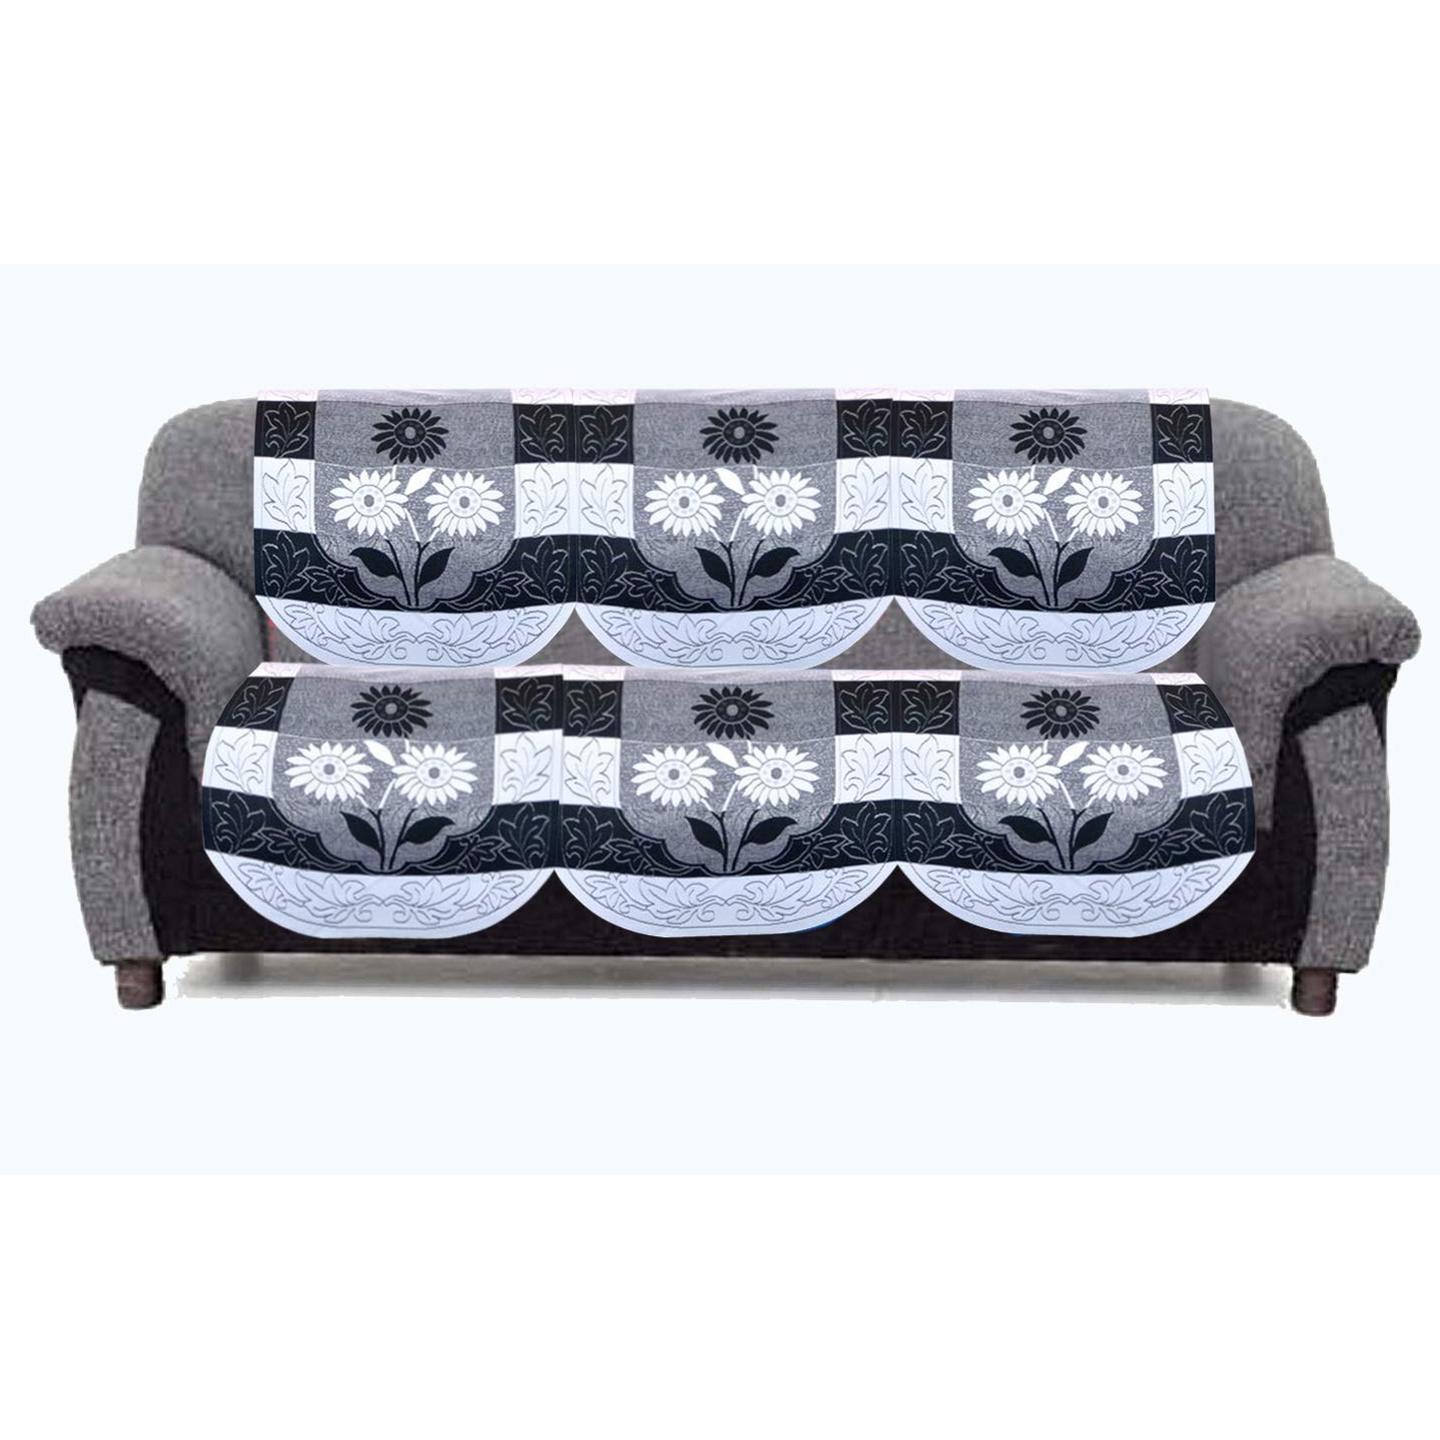 Flower Cotton 3 Seater Sofa Cover (Set of 2)